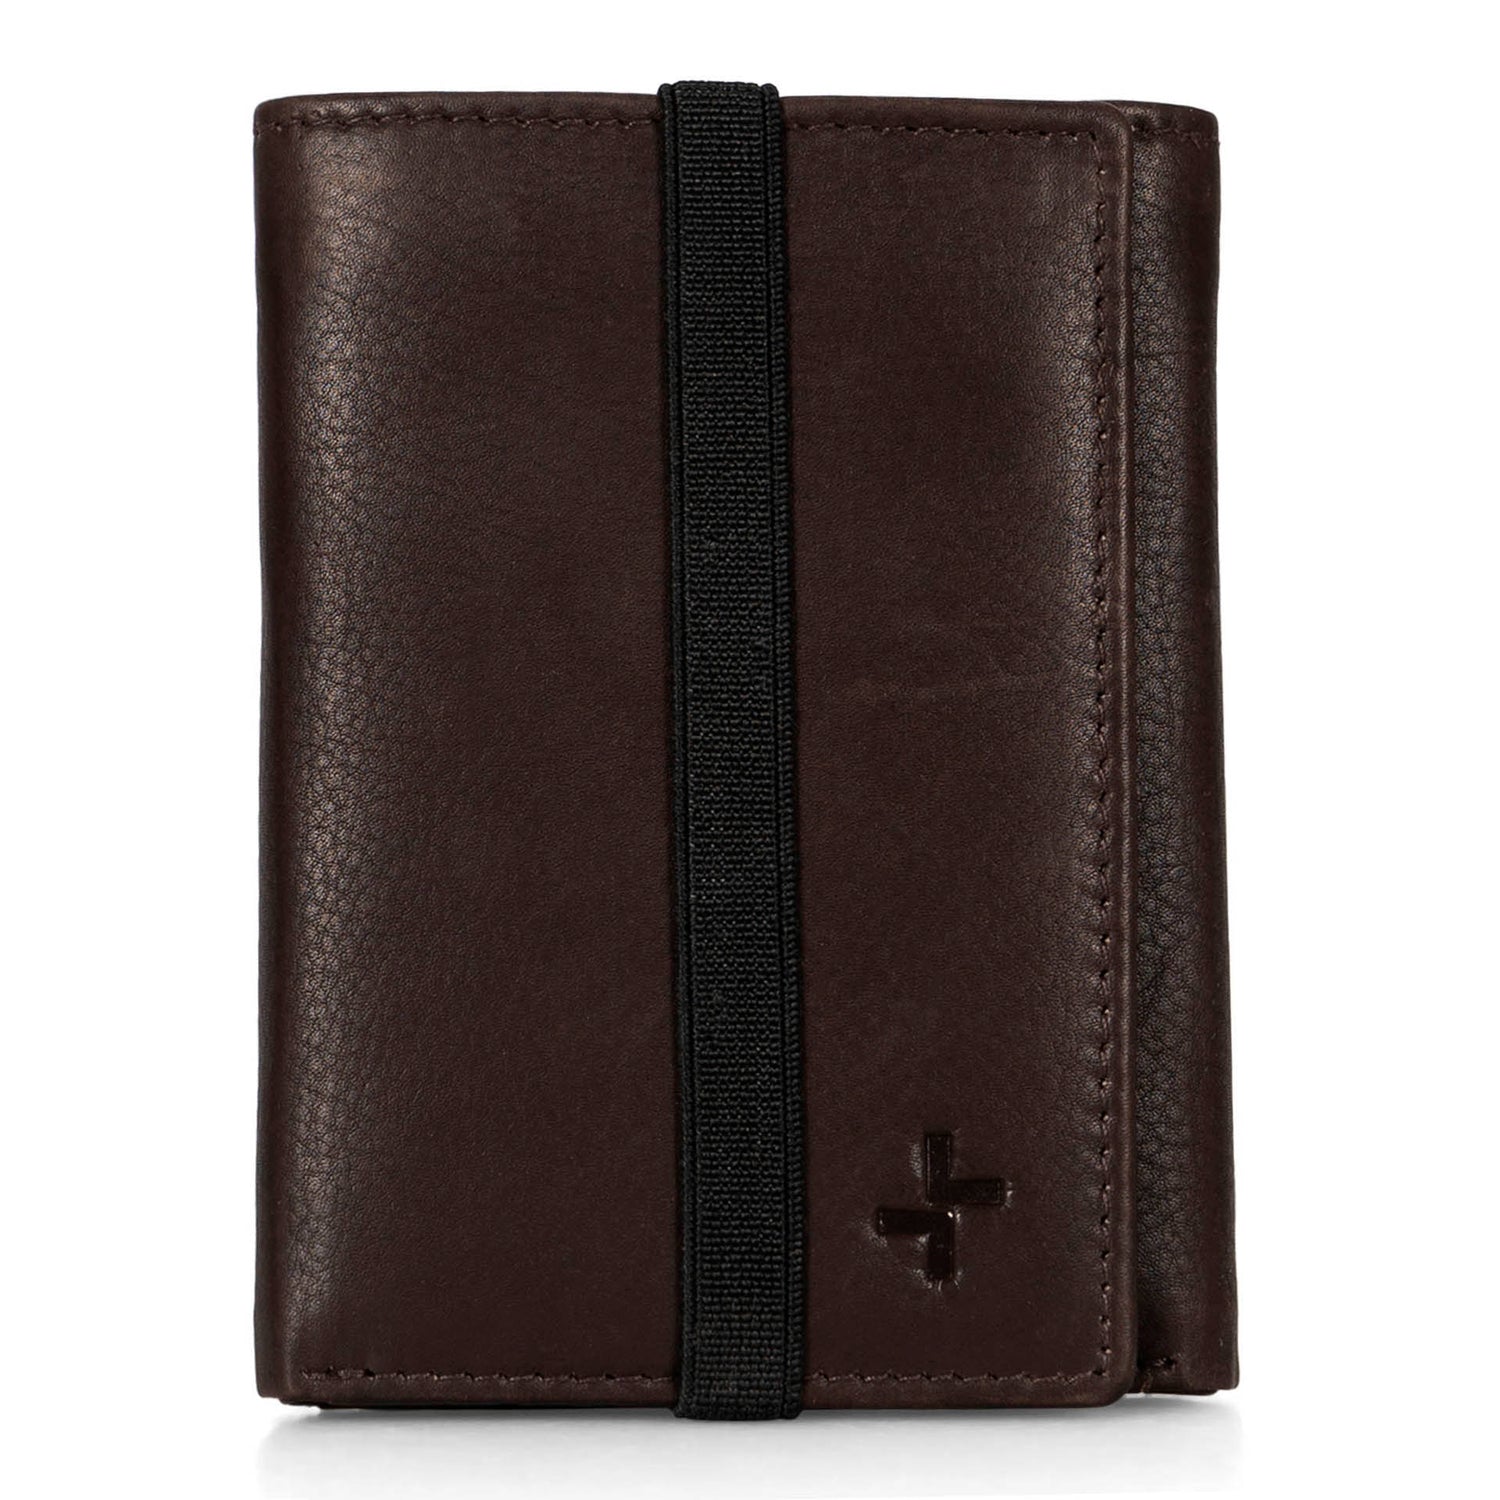 Front view of a brown wallet called Hudson designed by Tracker on a white background, showcasing its smooth leather and elastic band.